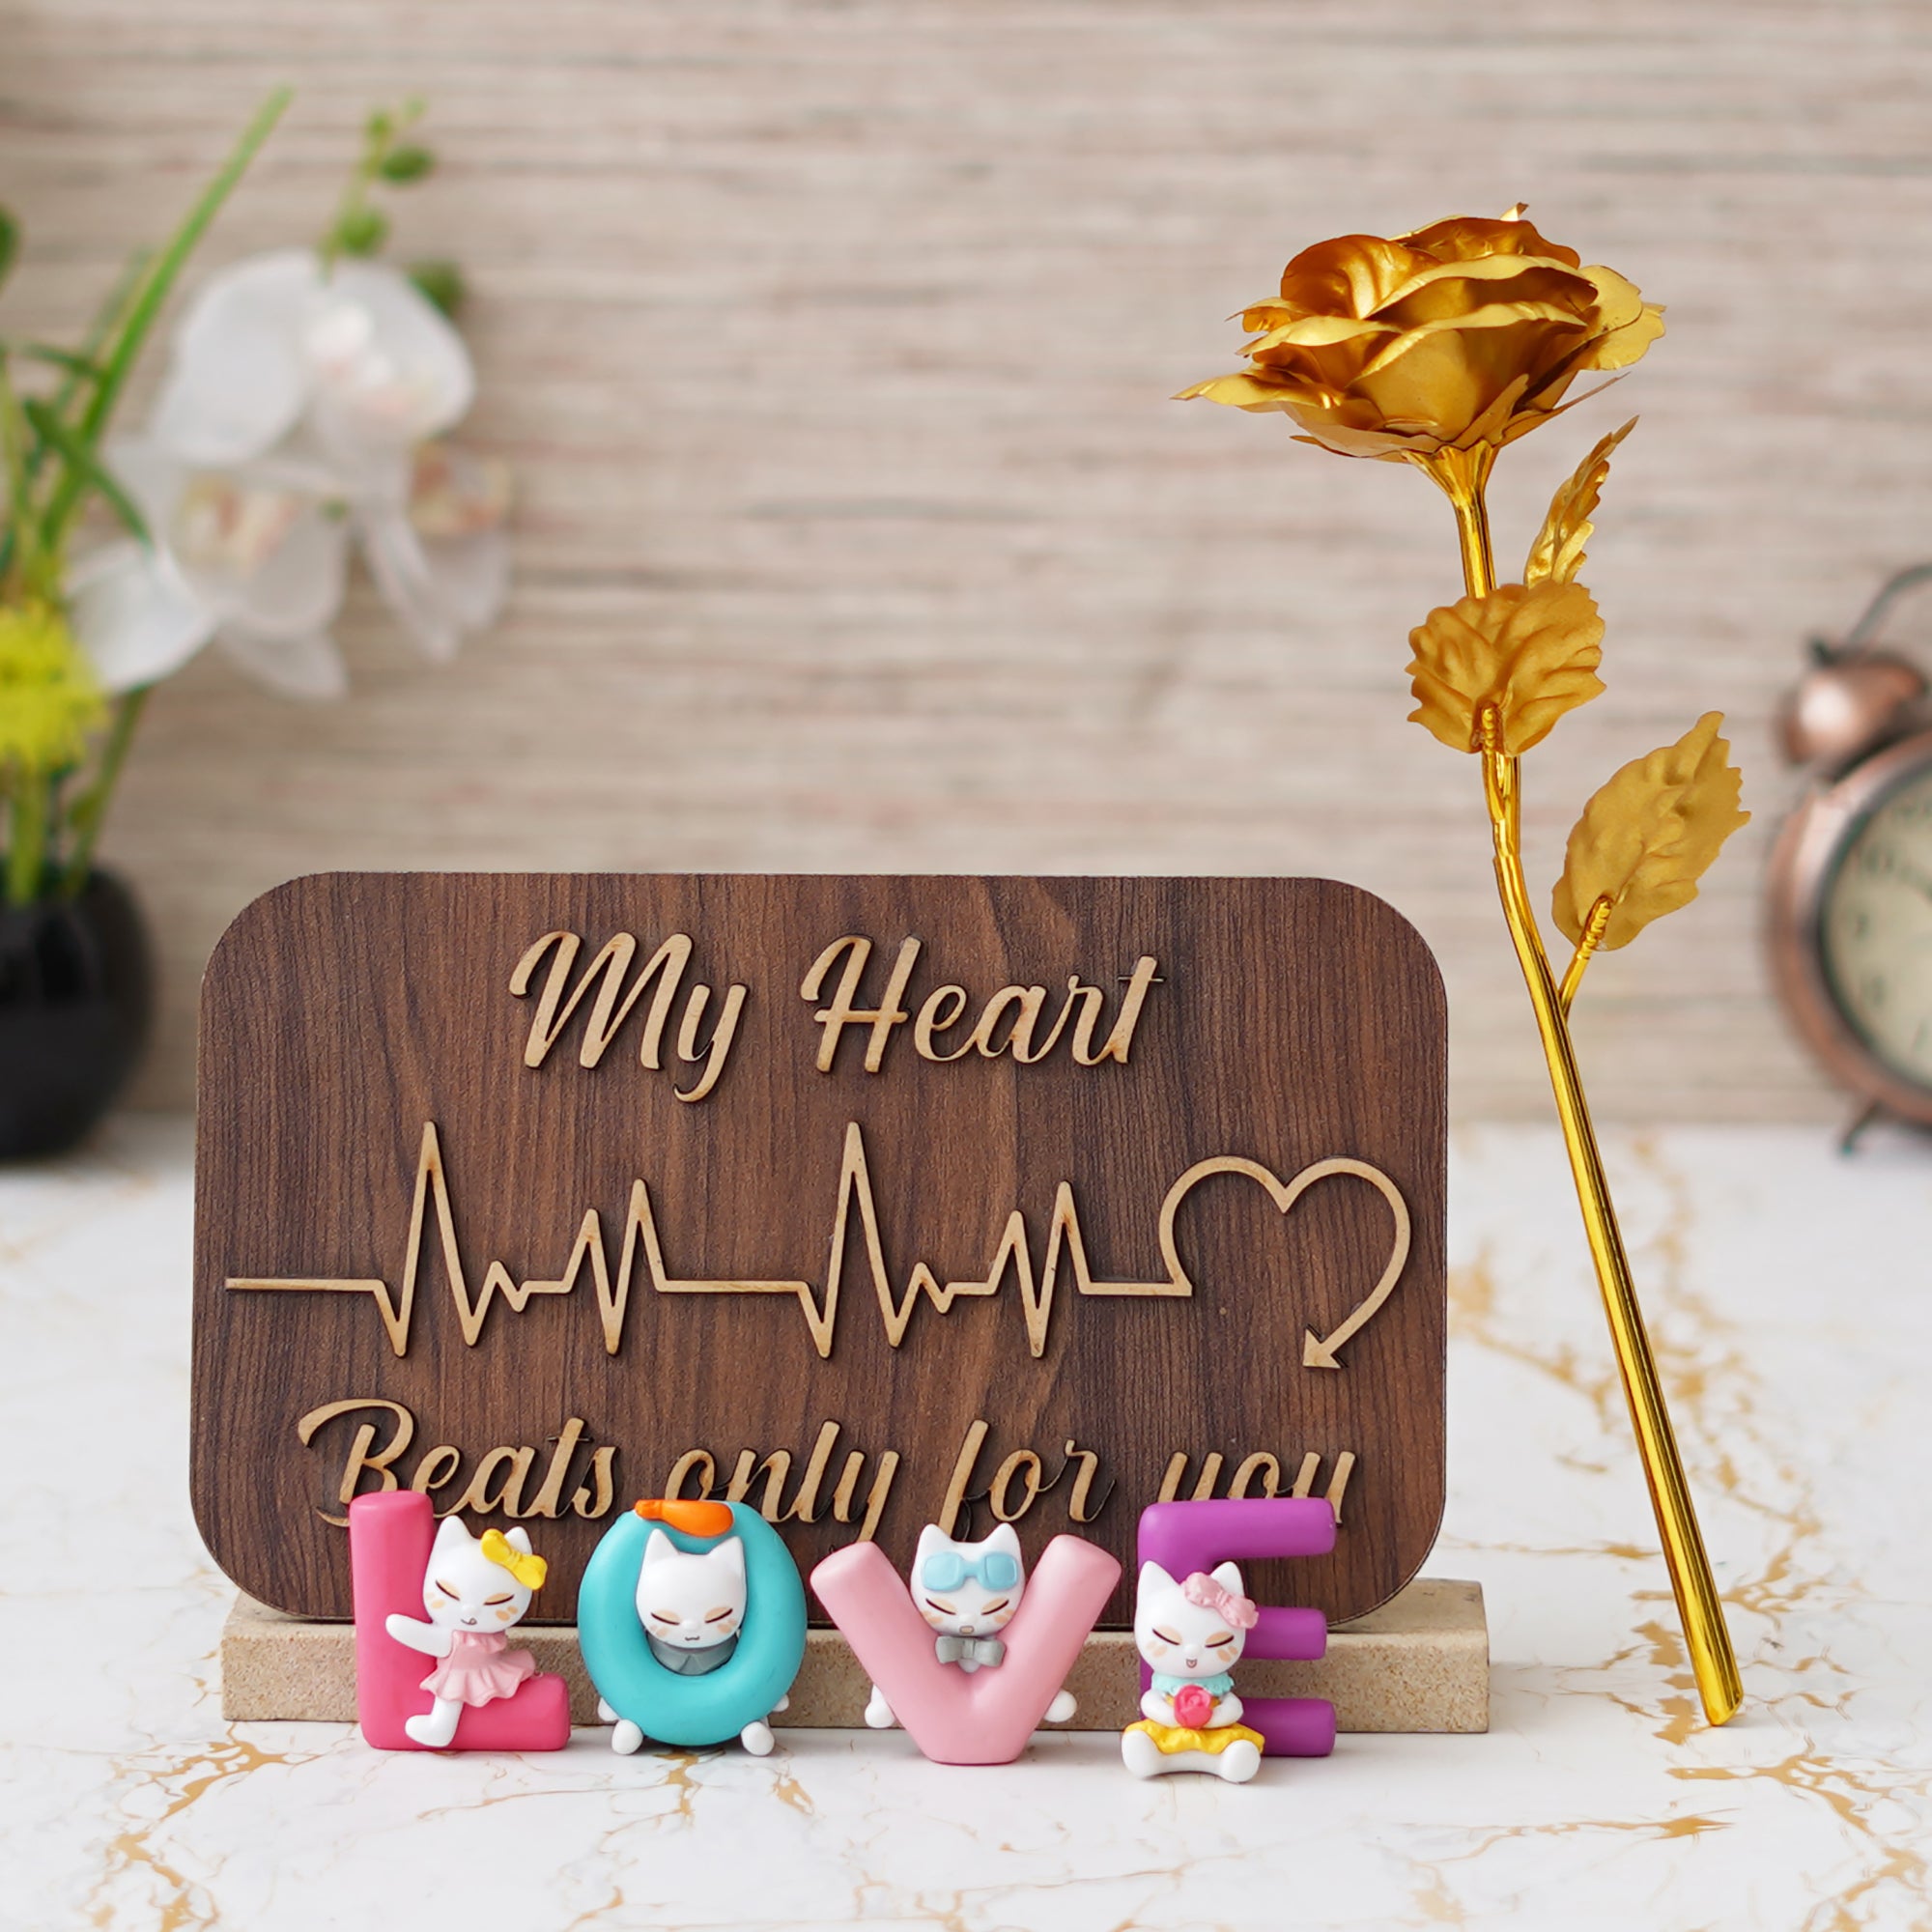 Valentine Combo of Golden Rose Gift Set, "My Heart Beats Only For You" Wooden Showpiece With Stand, "Love" Animated Characters Showpiece